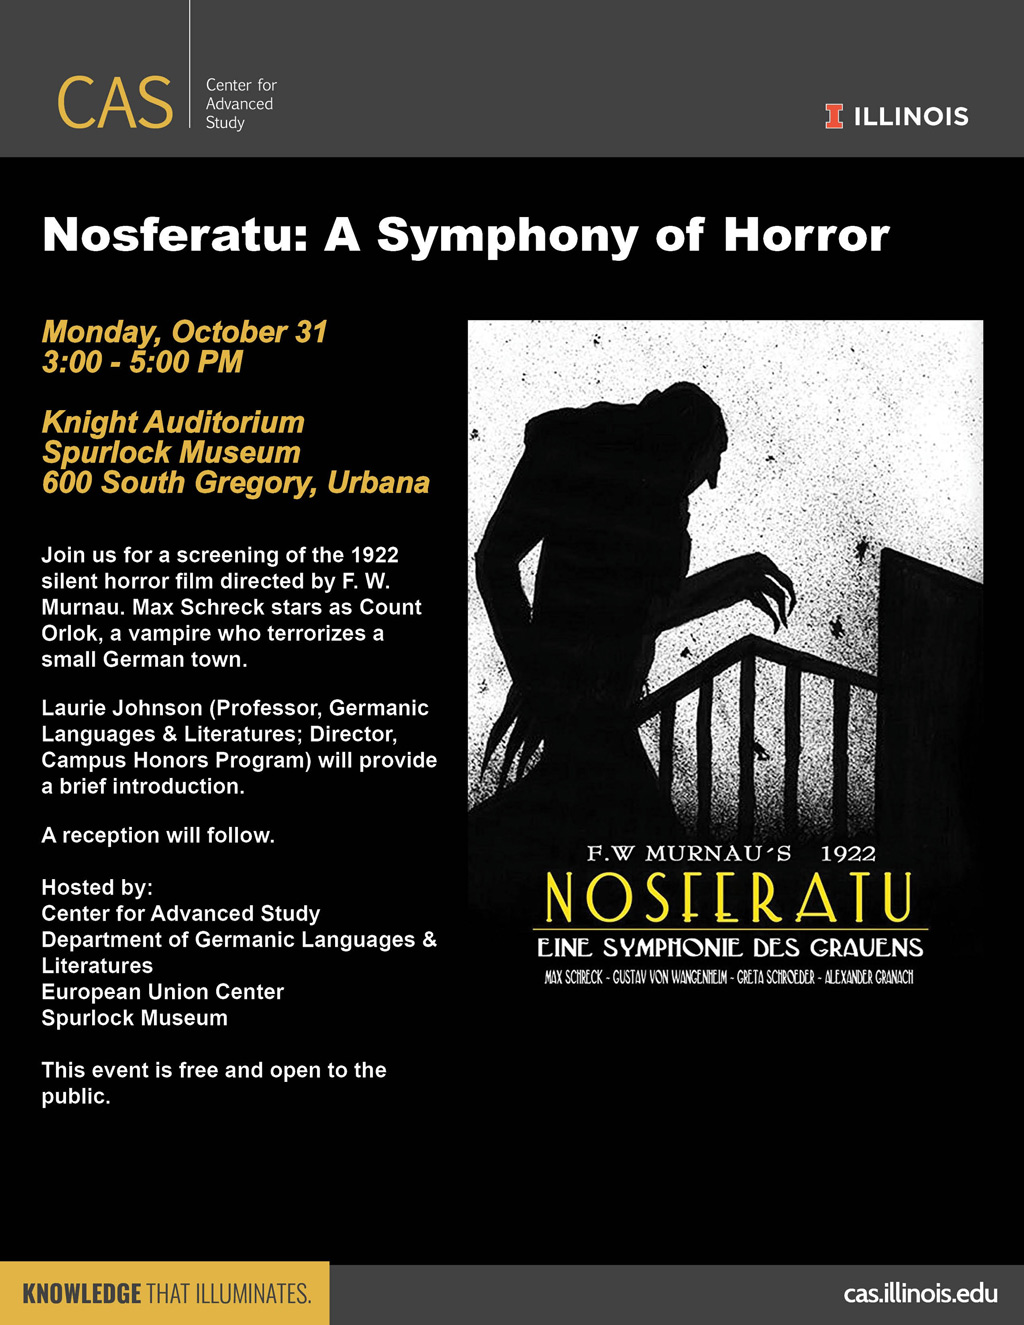 Dark gray poster reading "Nosferatu: A Symphony of Horror," with a silhouette of a vampire against a white background.